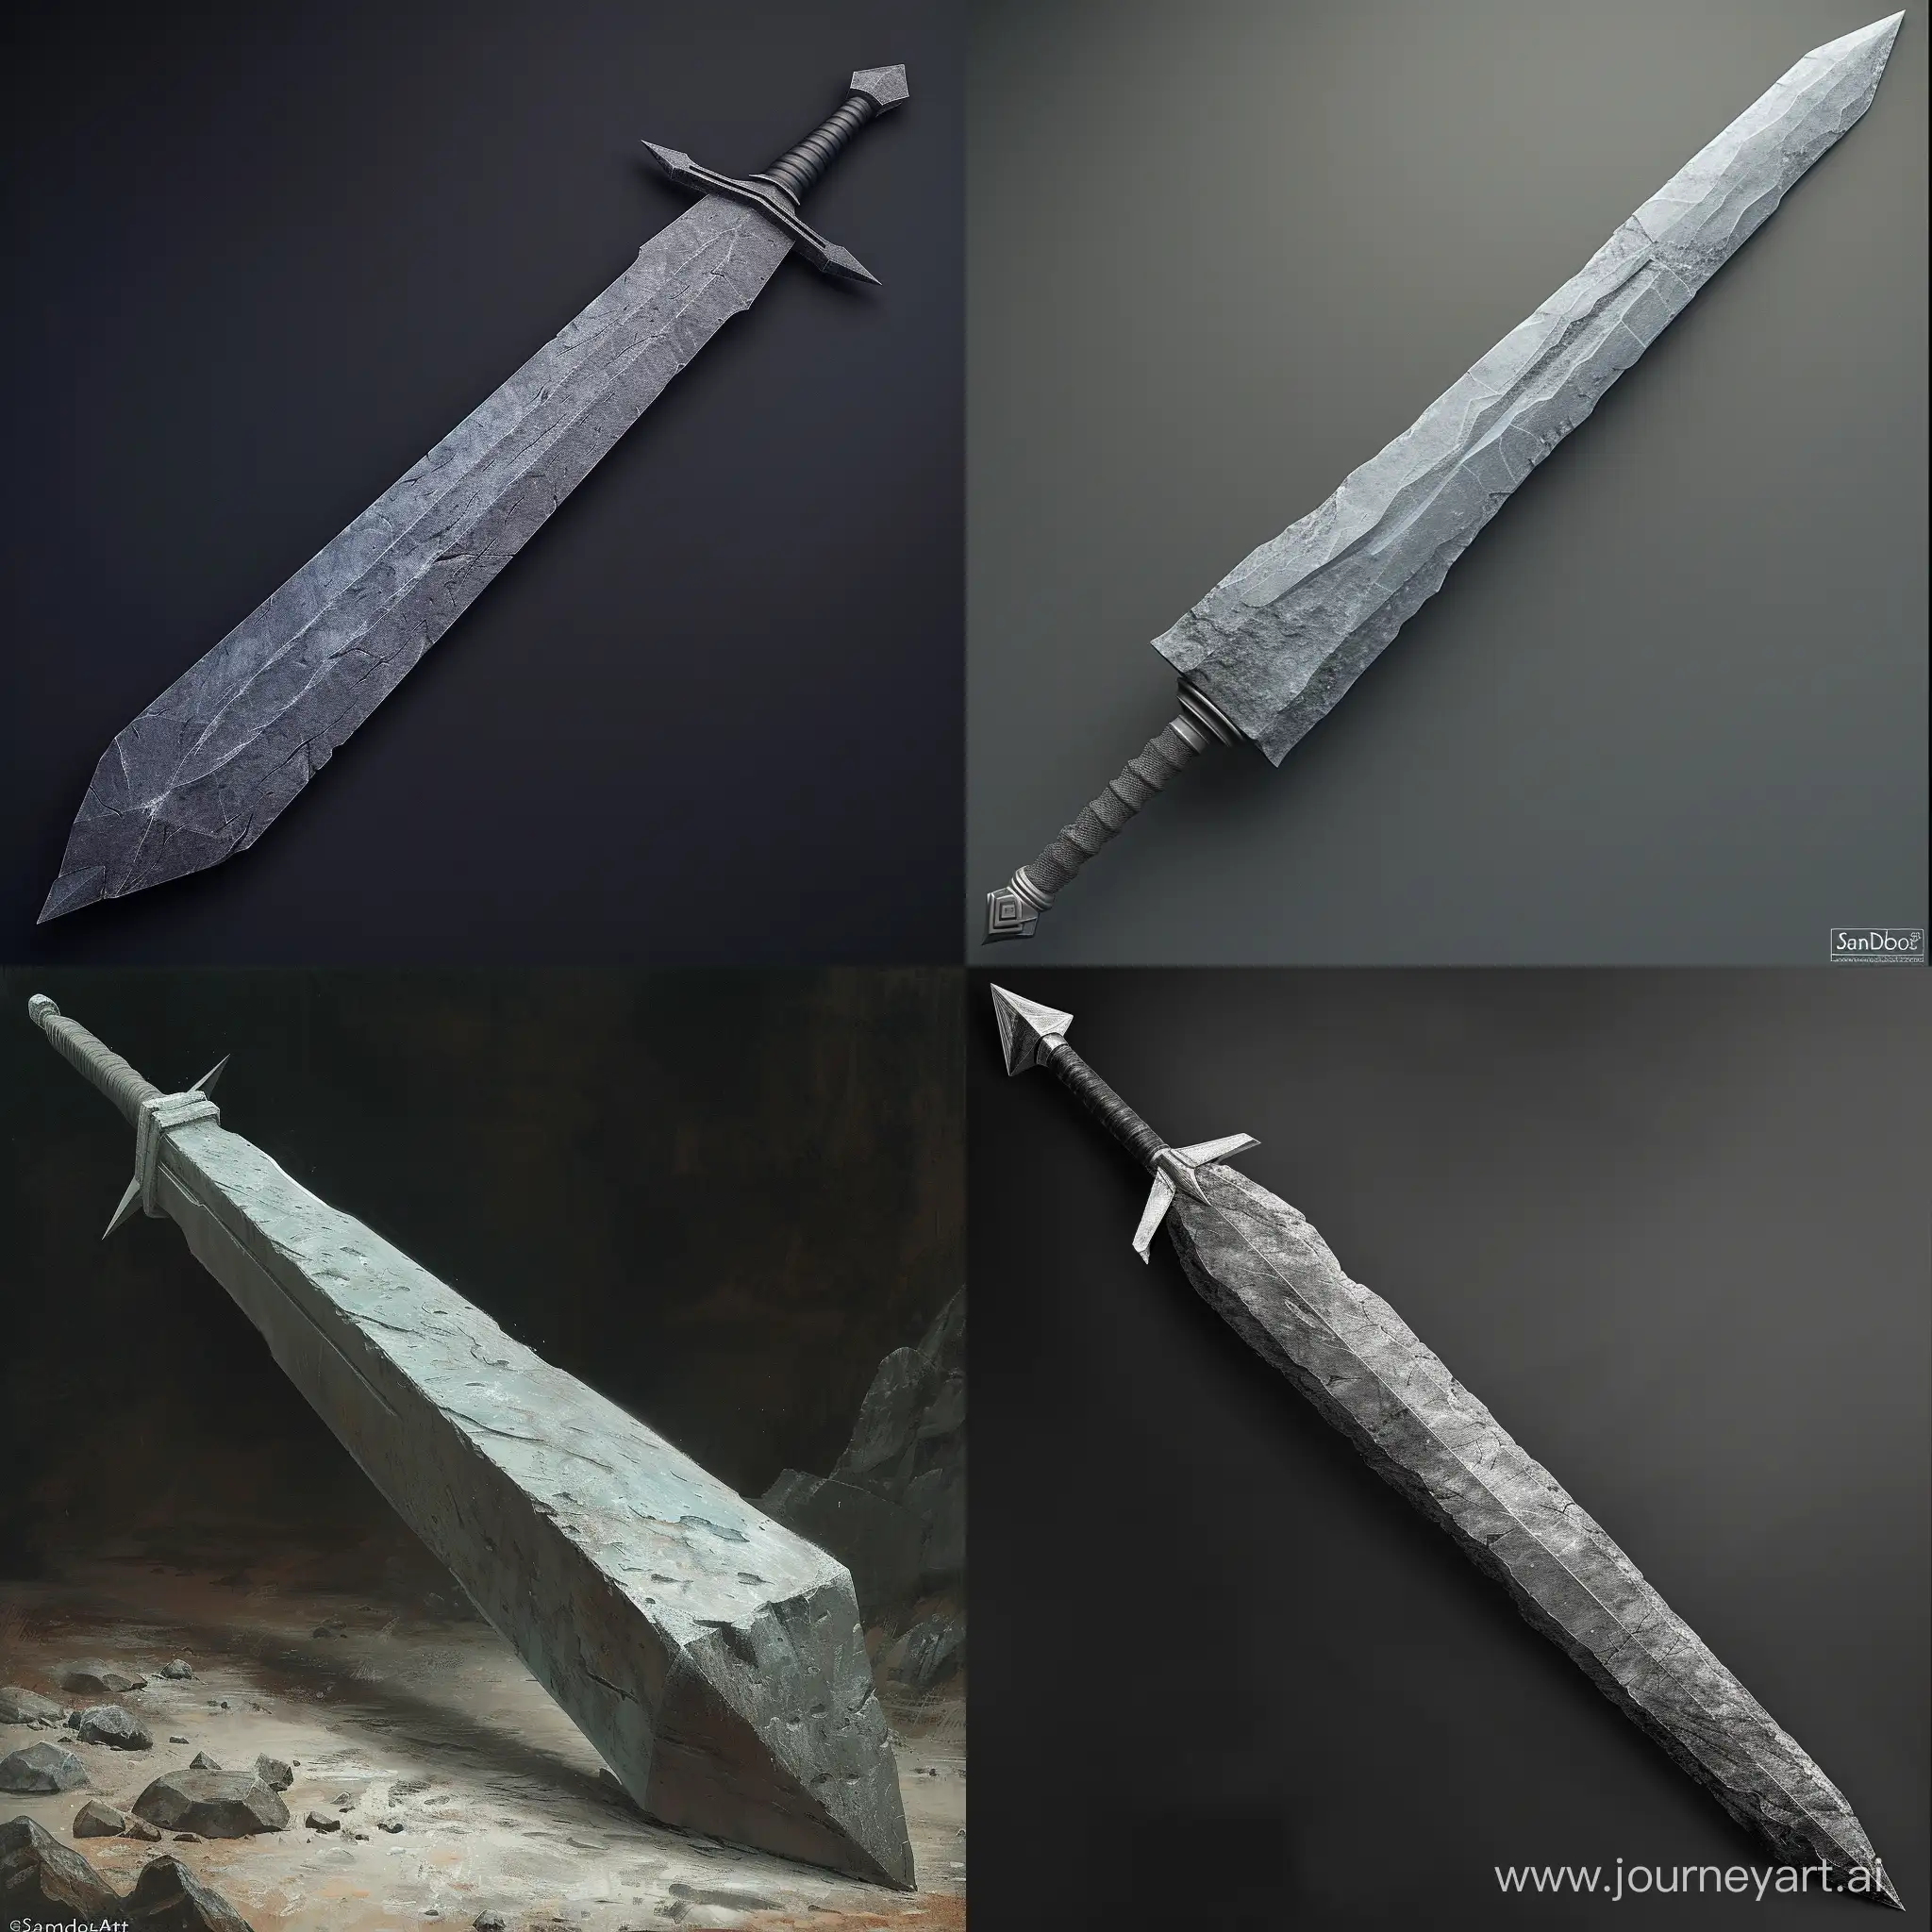 A long and strong stone sword, with a very sharp edge, hyperrealistic surrealism, in Anime style, art by SamDoesArt